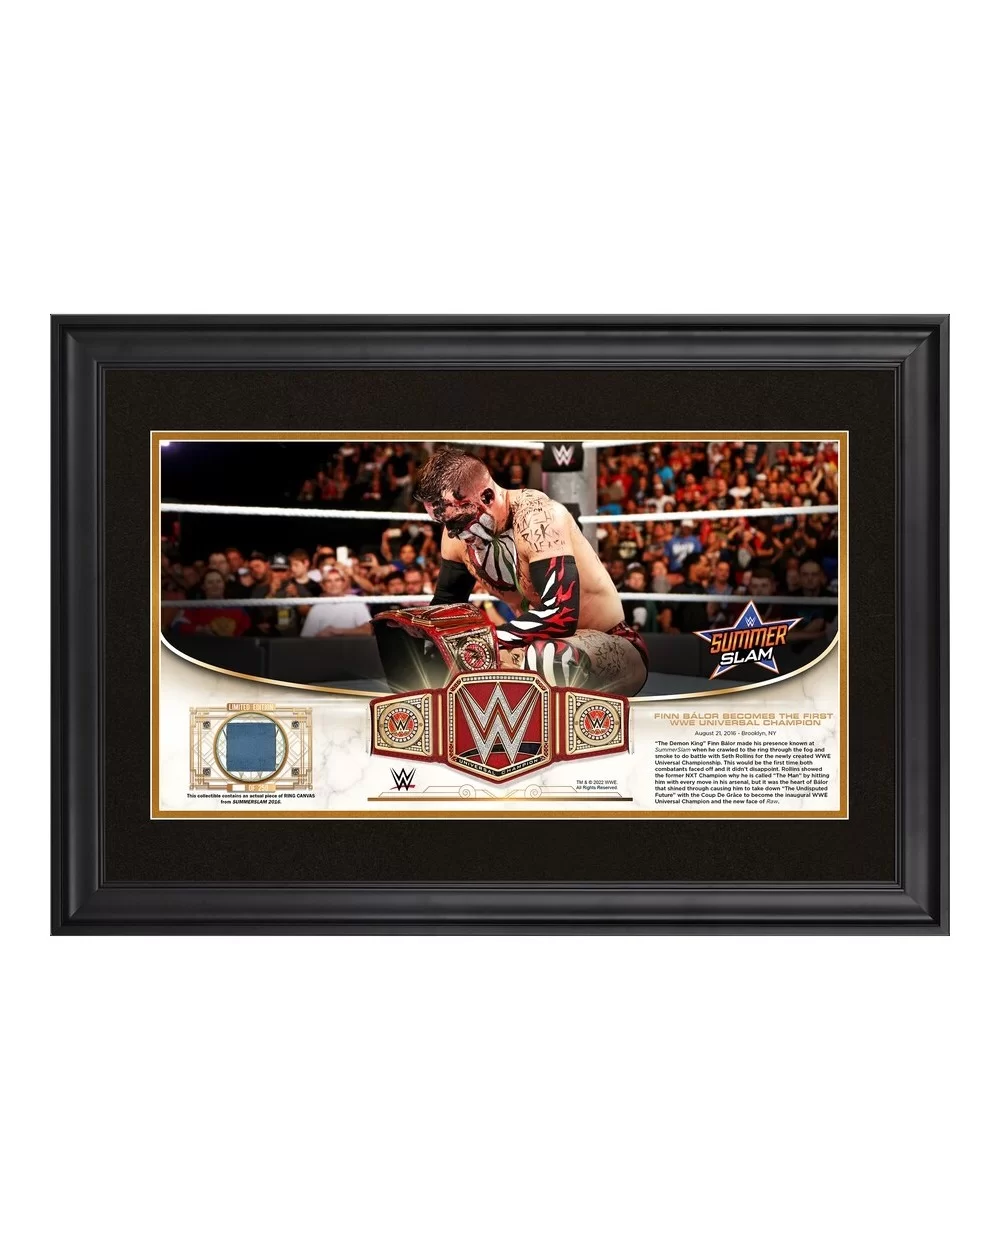 Finn Balor WWE Golden Moments Framed 10" x 18" 2016 SummerSlam Collage with a Piece of Match-Used Canvas - Limited Edition of...